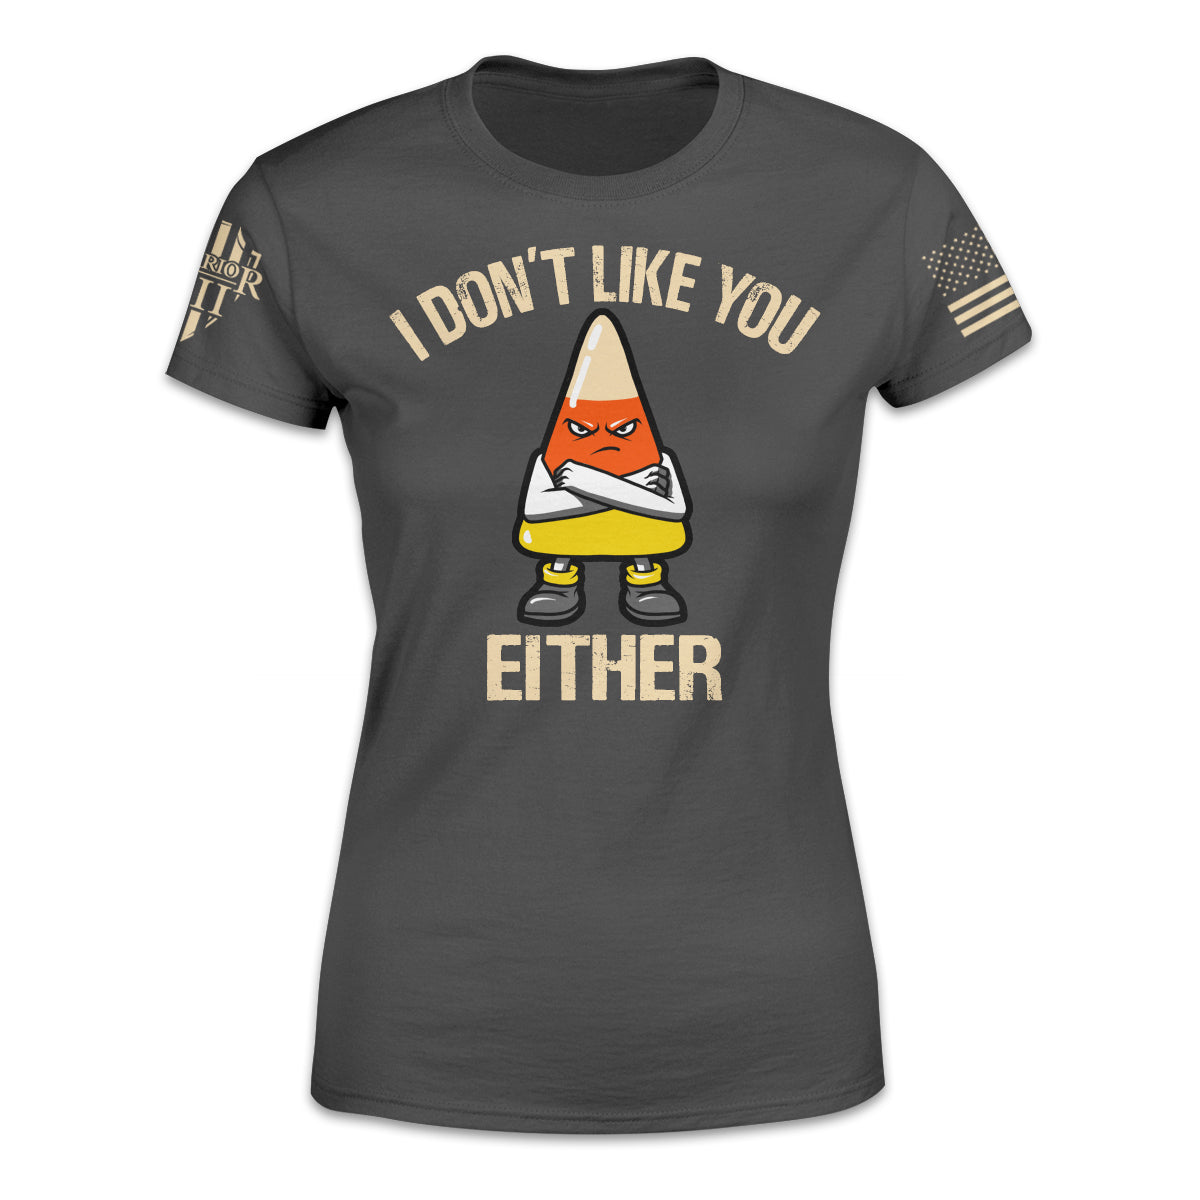 I Don't Like You Either - Women's Relaxed Fit